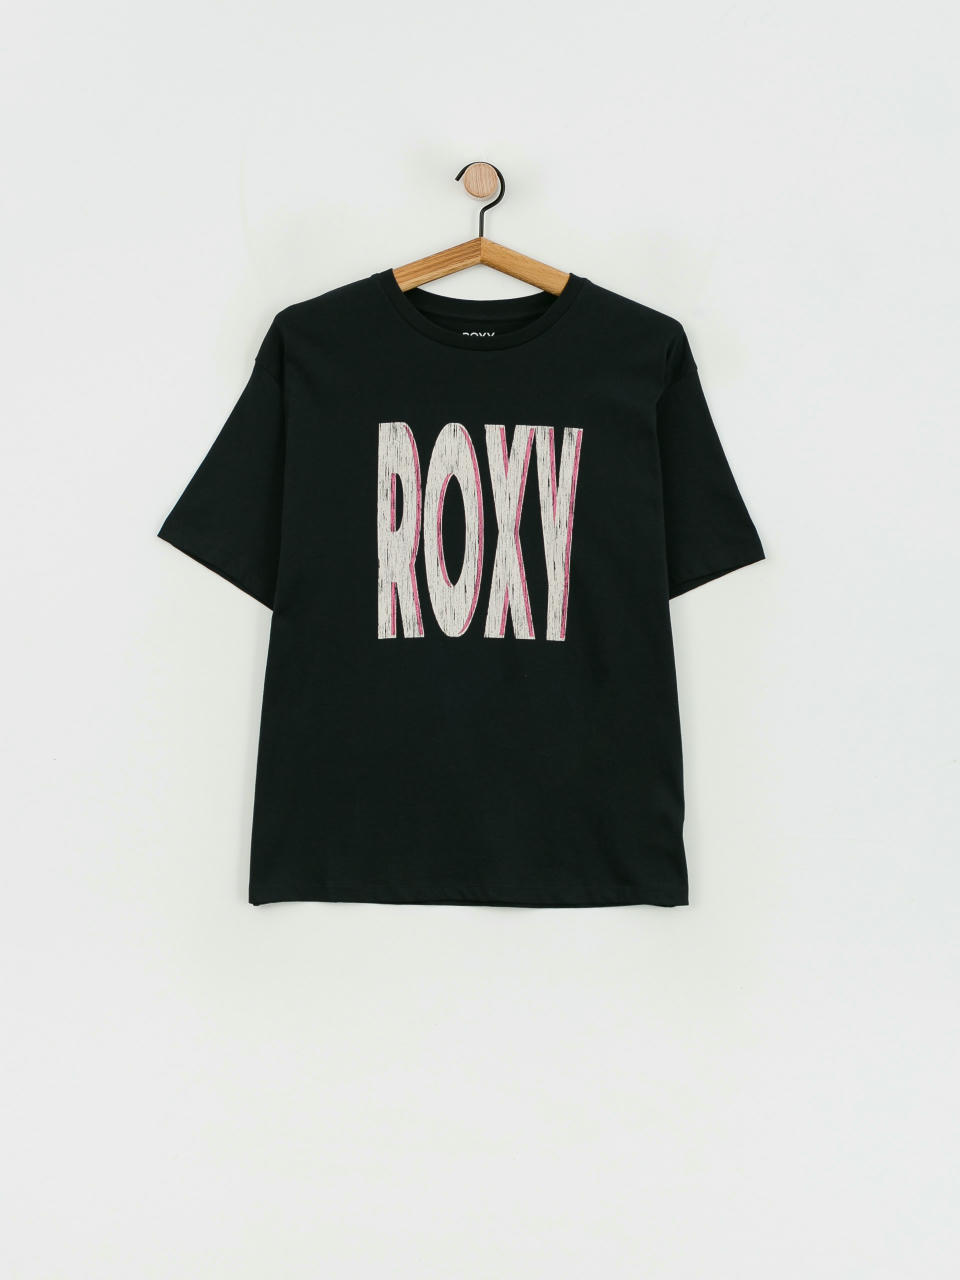 The T-shirt Wmn (anthracite) Roxy Sky Under Sand